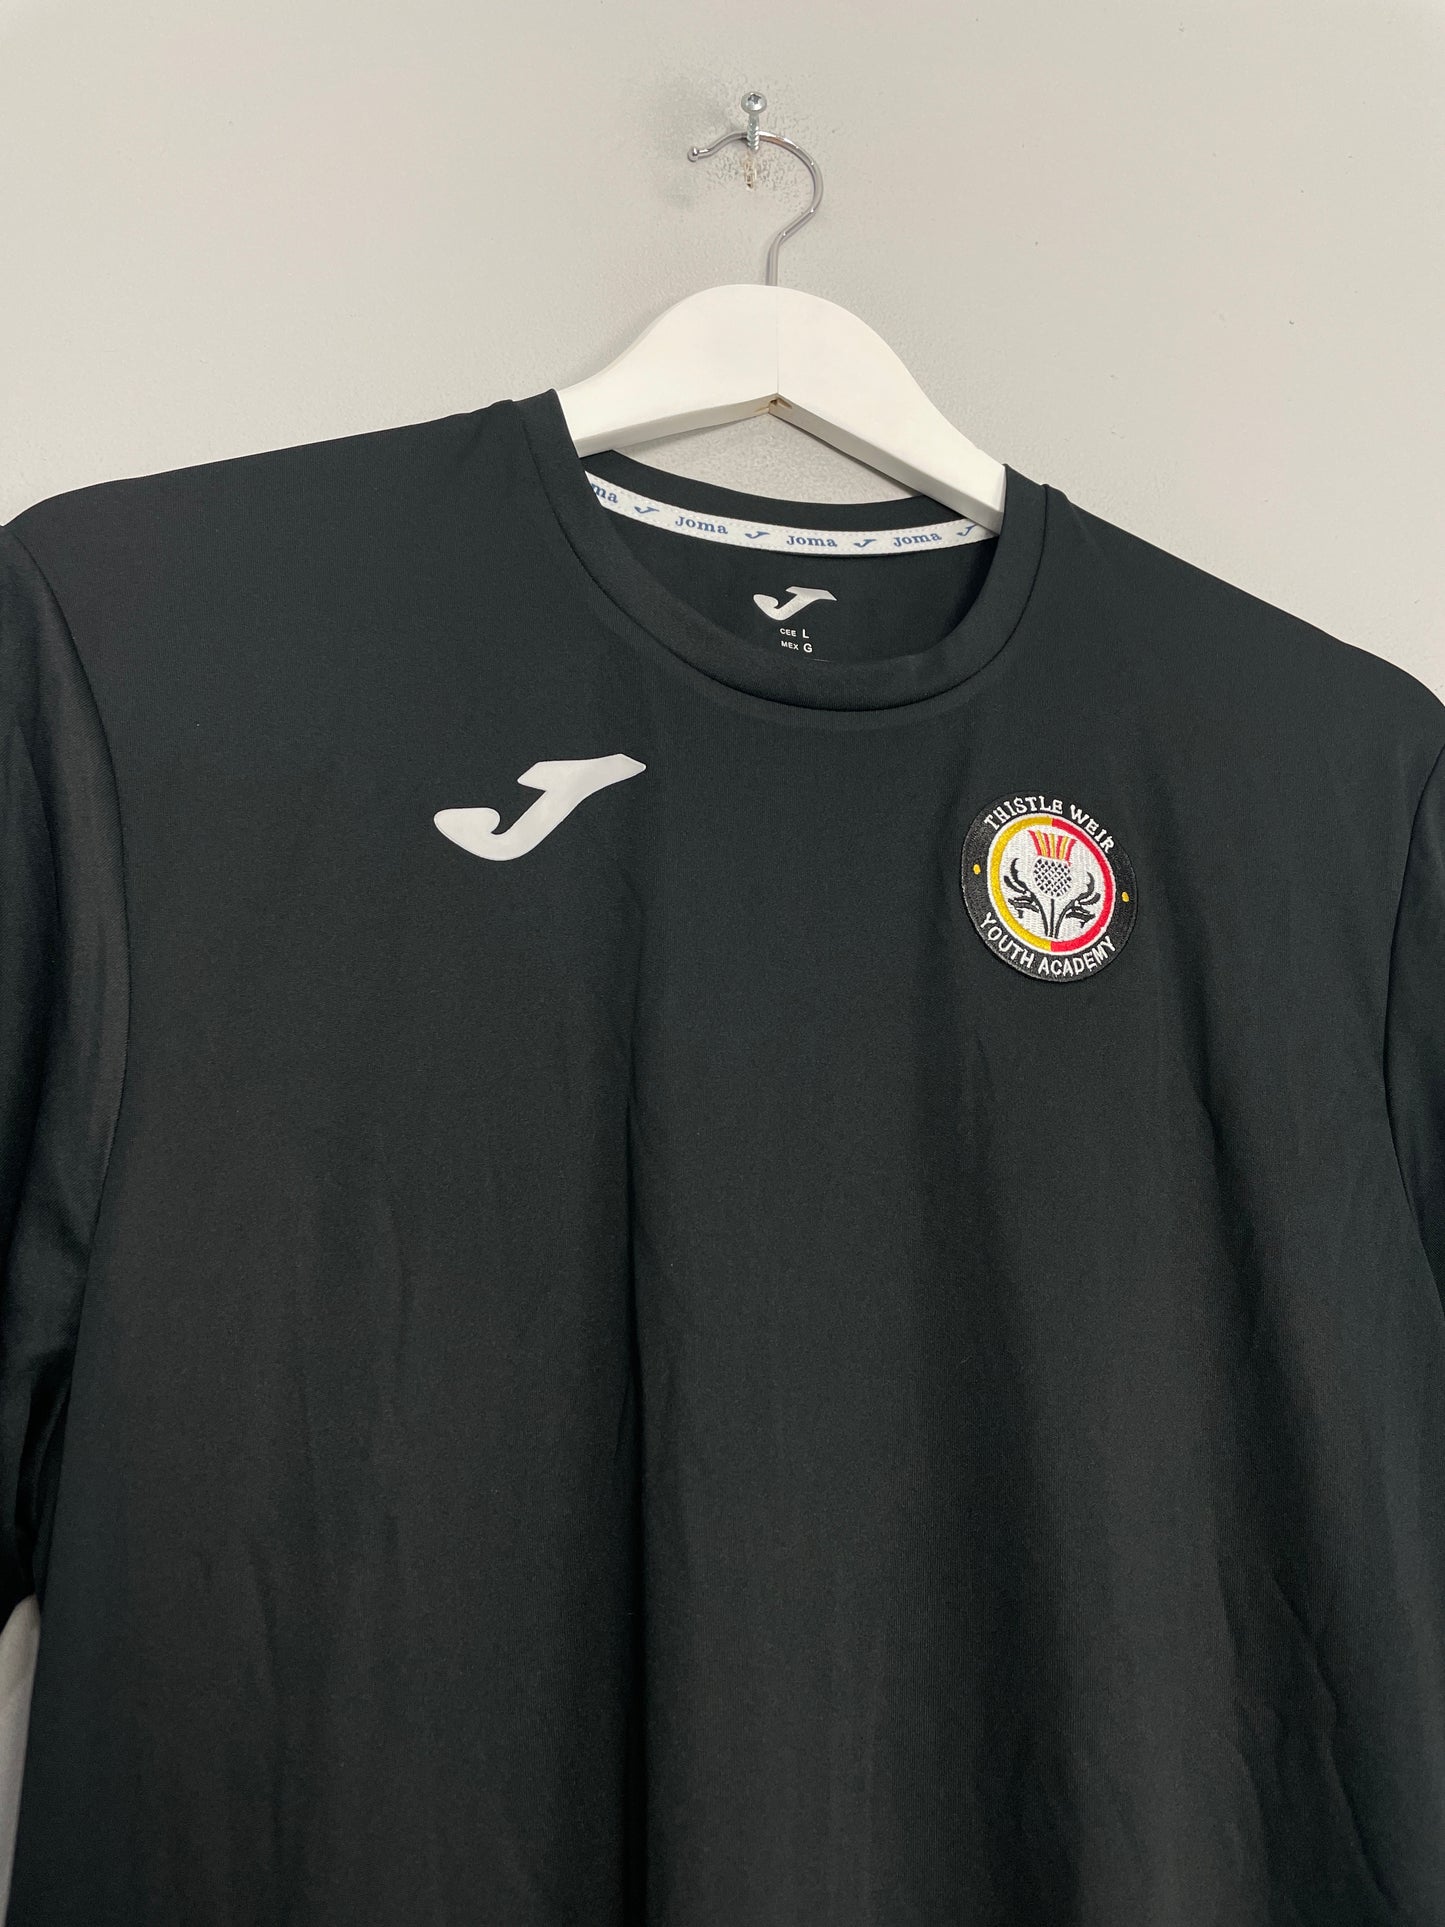 2018/19 THISTLE WEIR YOUTH TRAINING SHIRT (L) JOMA